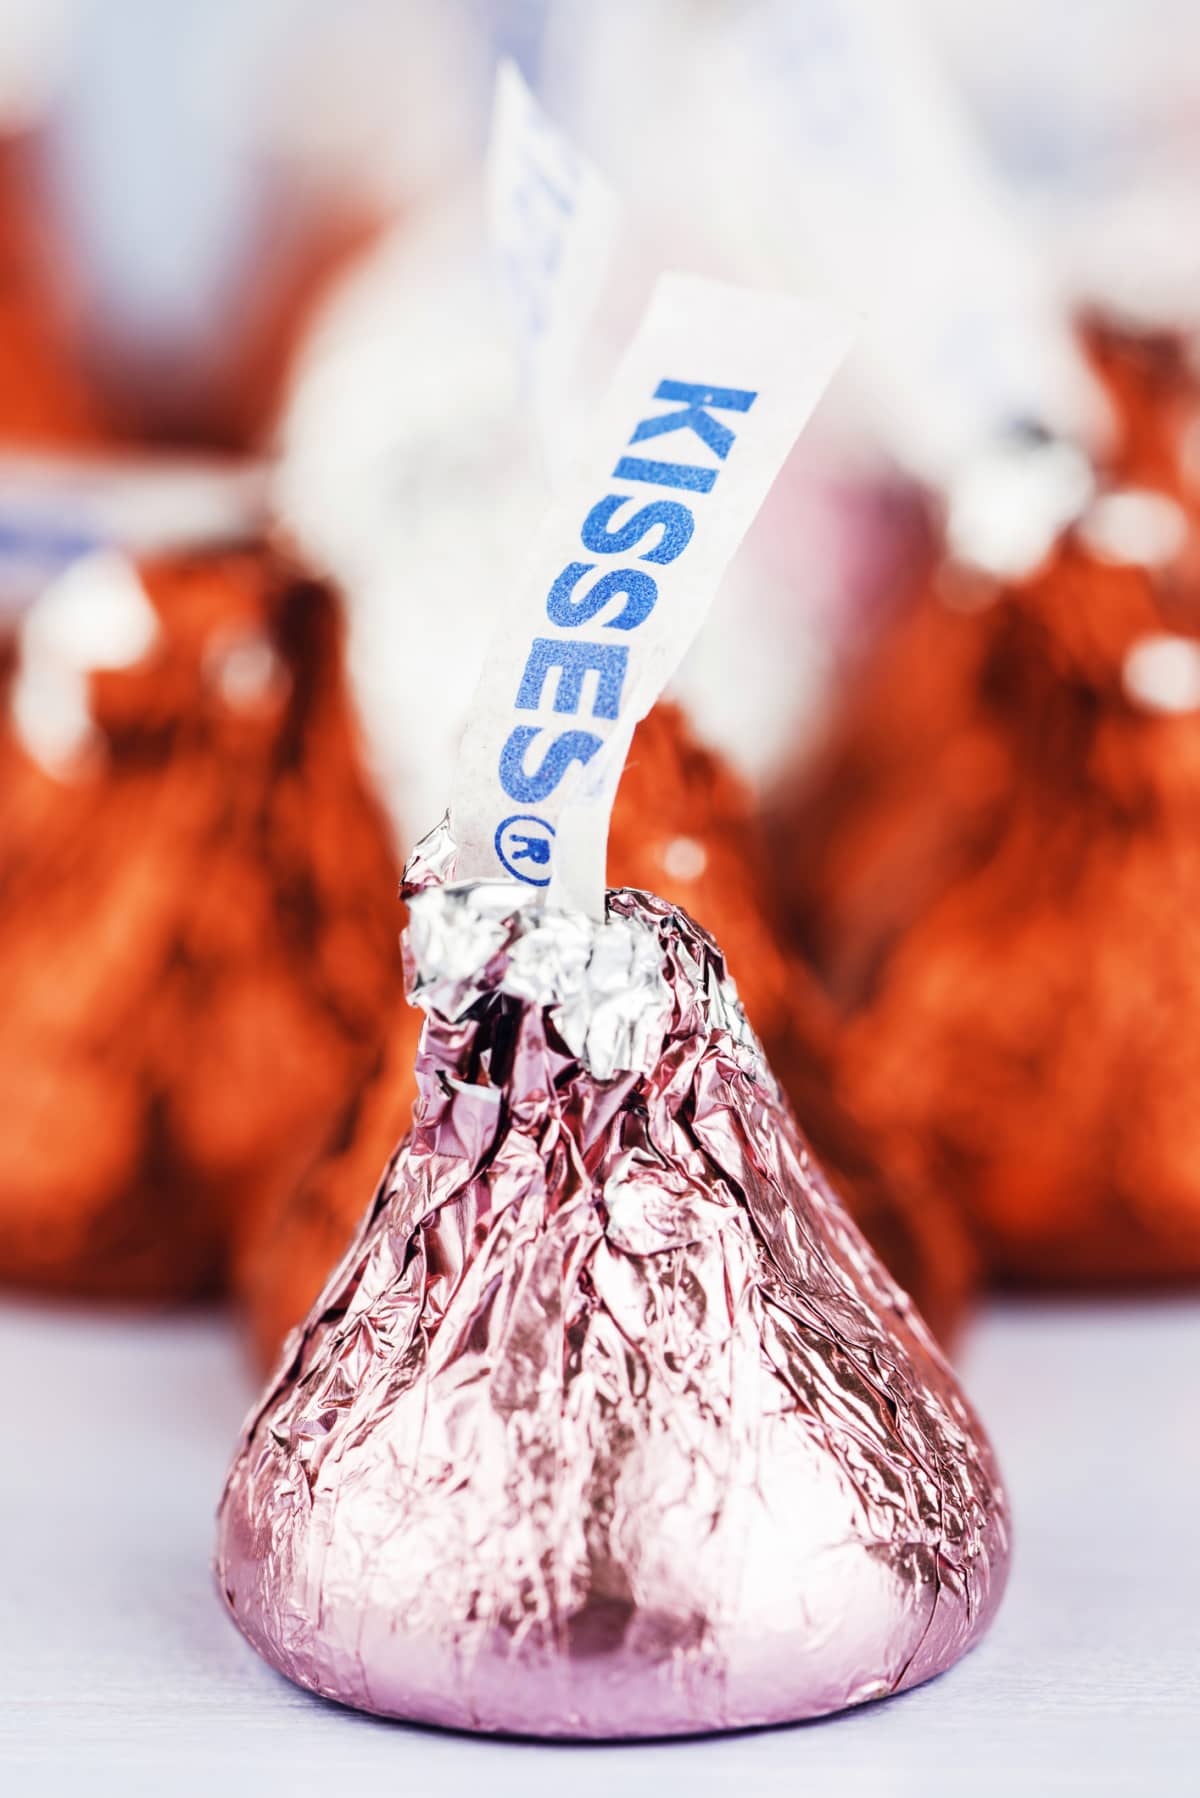 Hershey's Kiss in pink wrapper